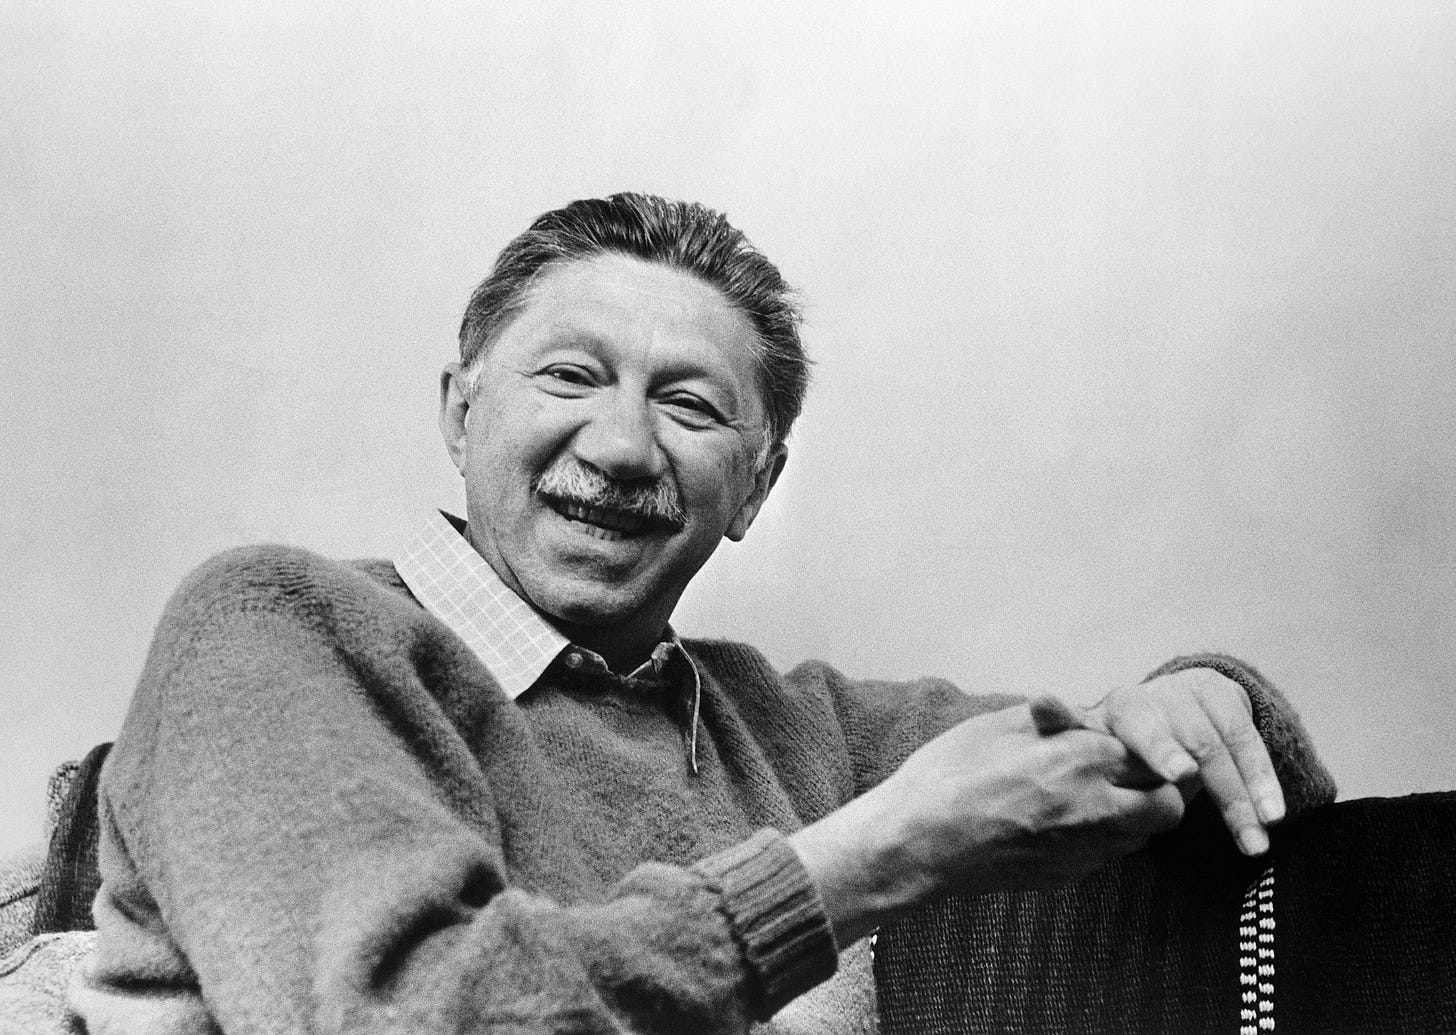 Abraham Maslow's Life and Legacy